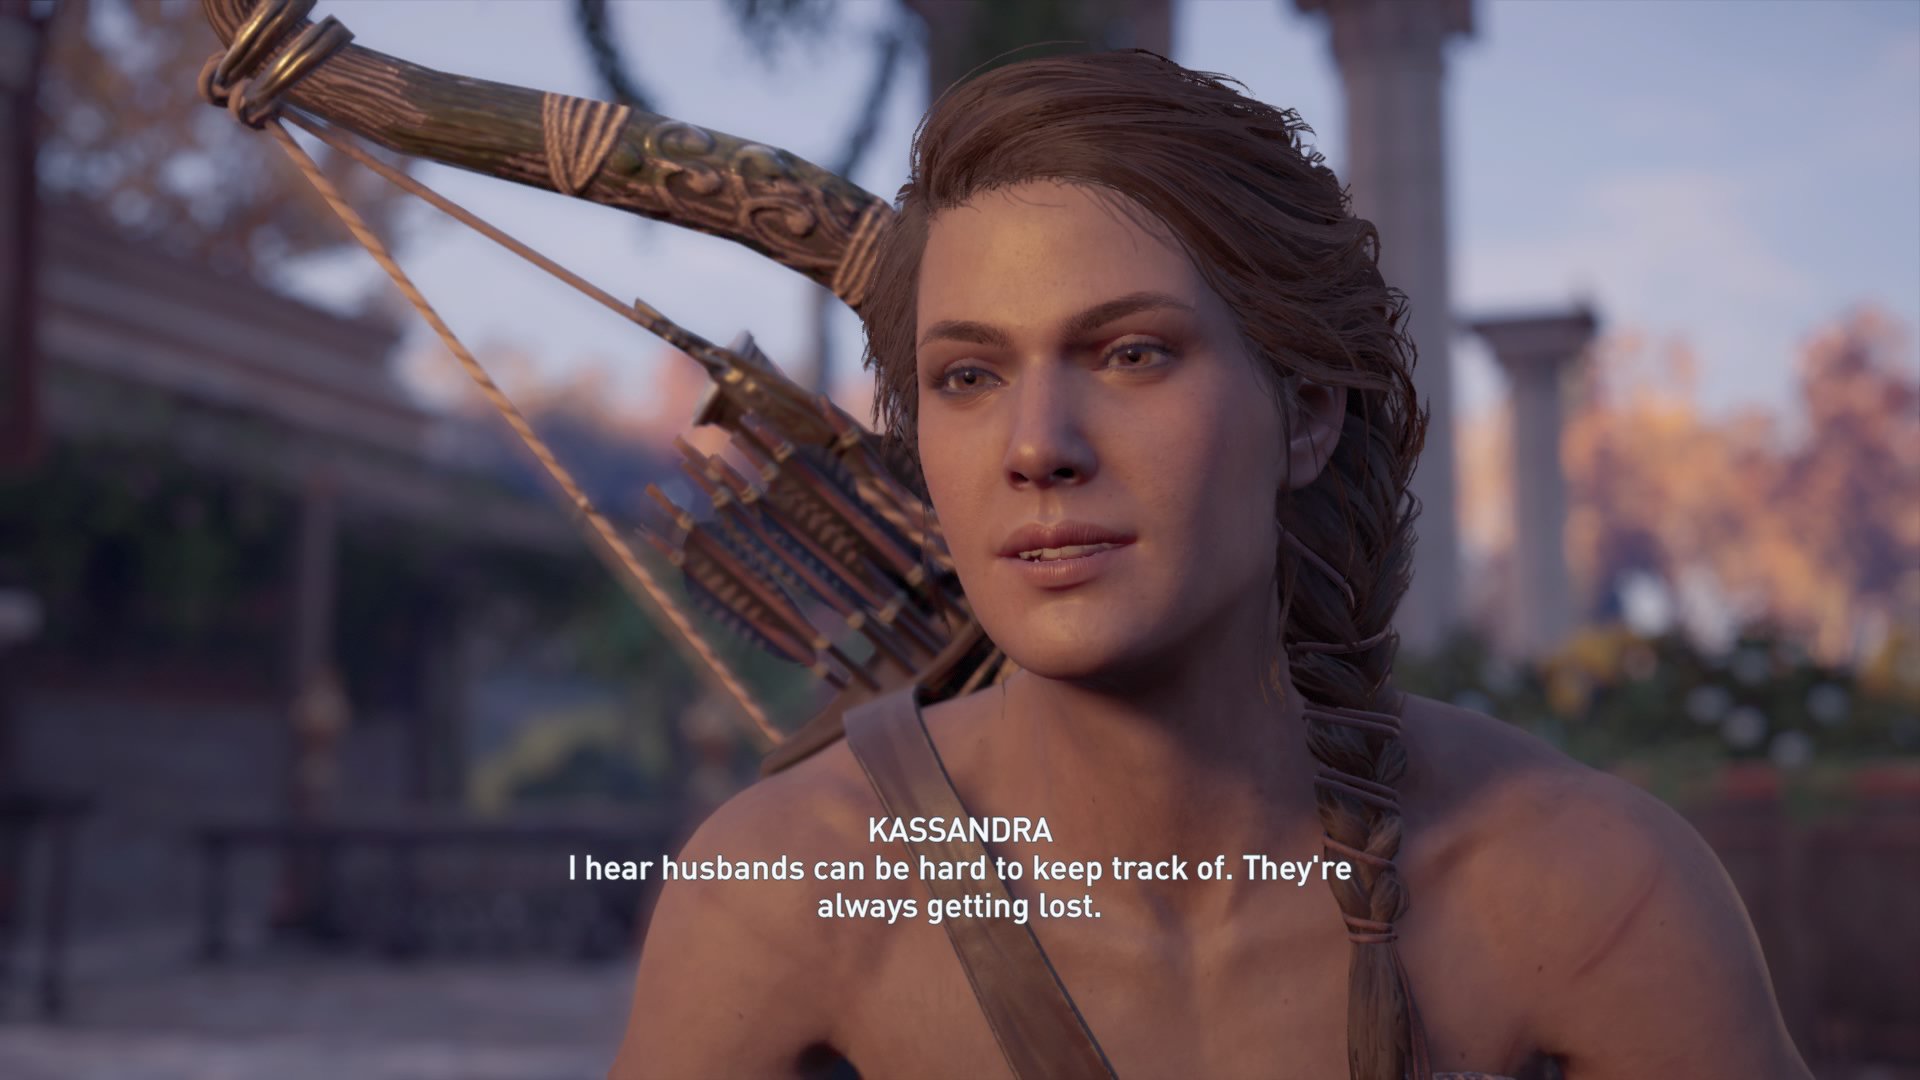 PlayStation - Assassin Creed Odyssey's Kassandra is coming